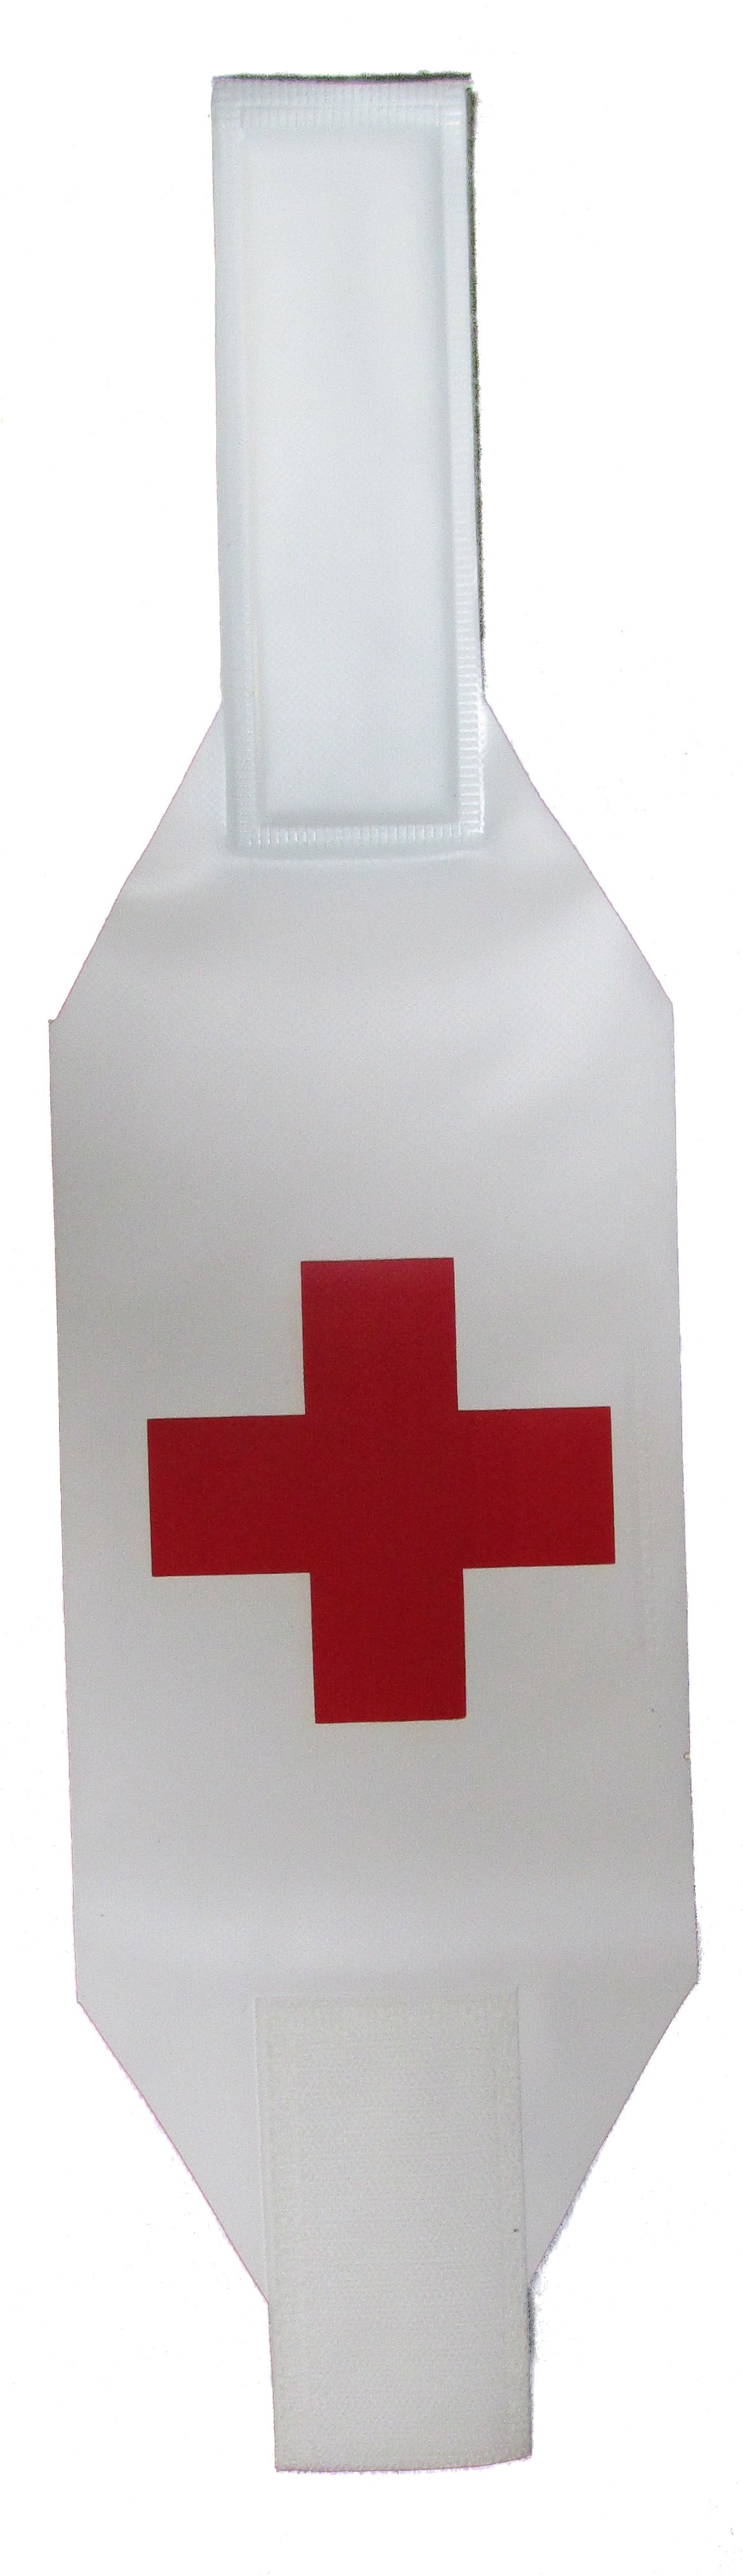 Red Cross Arm Band - Reversible with Hook and Loop